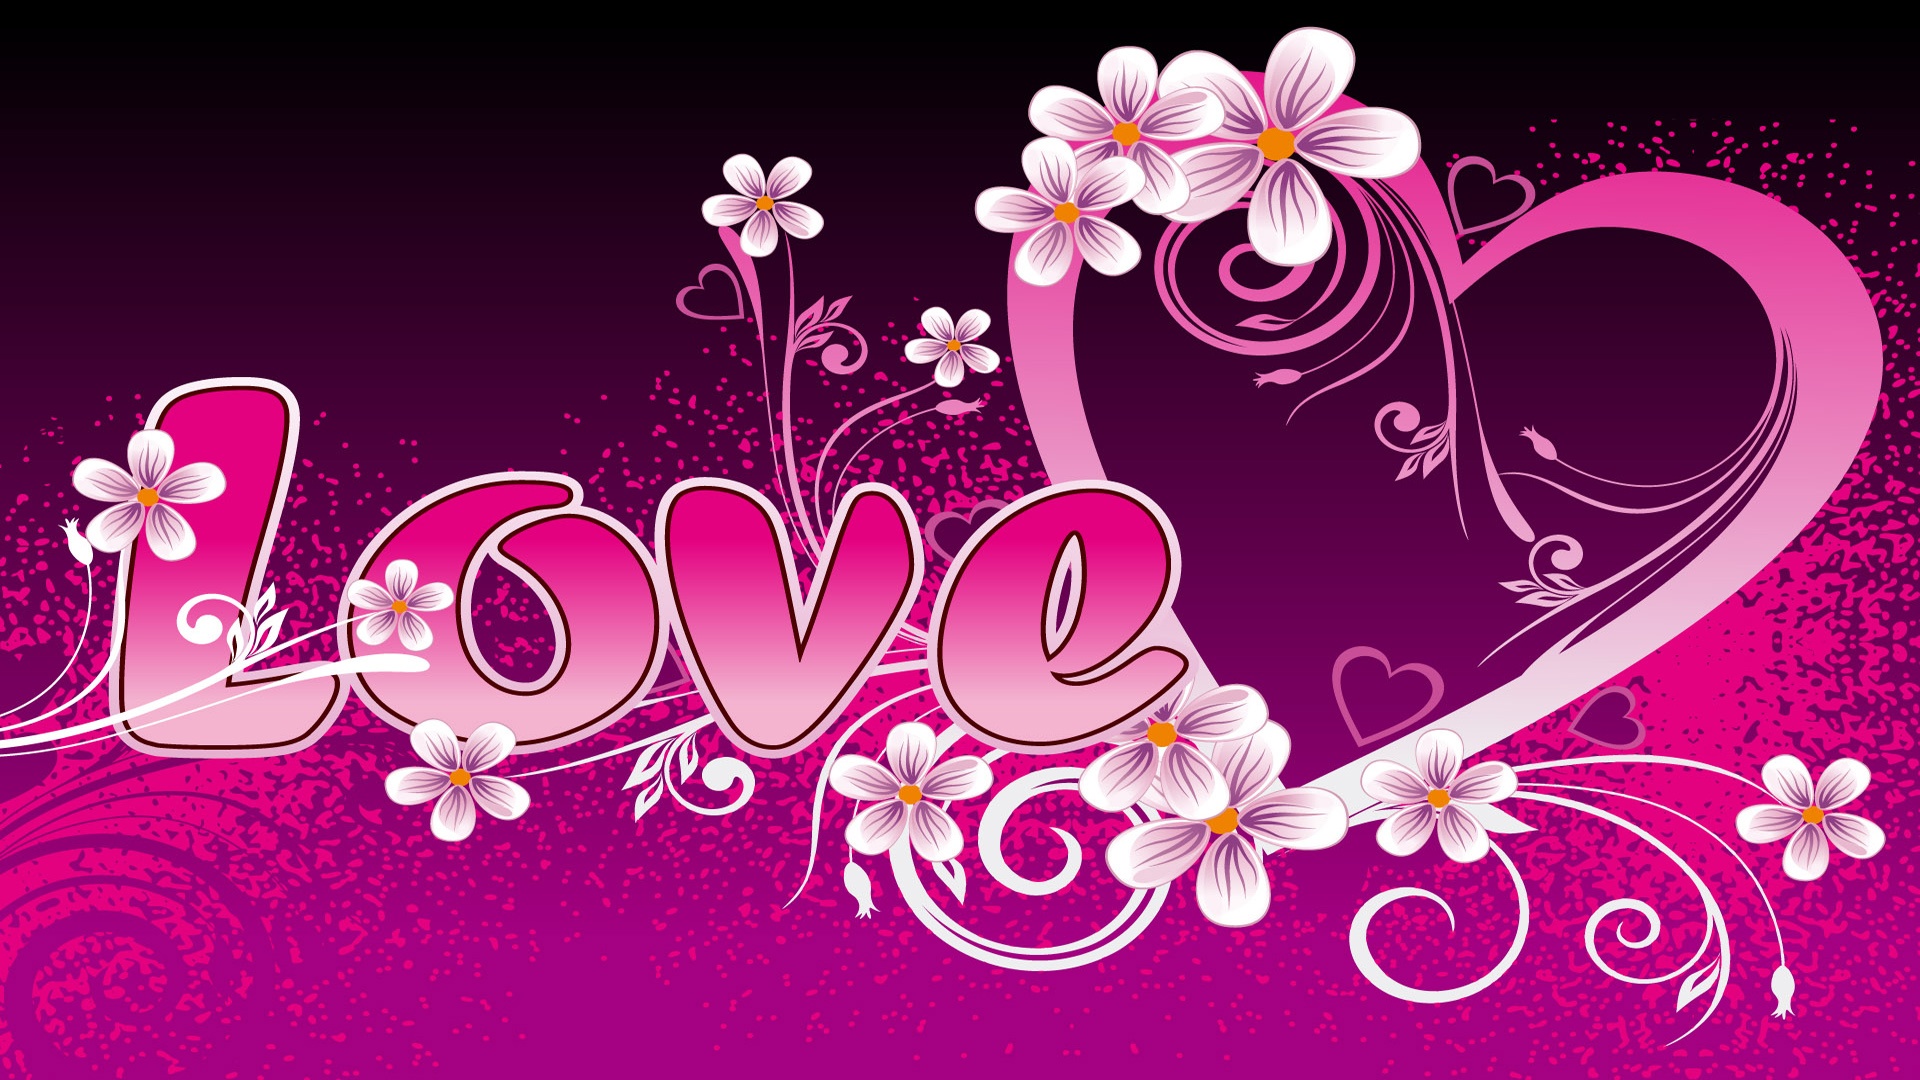 heart wallpapers pink